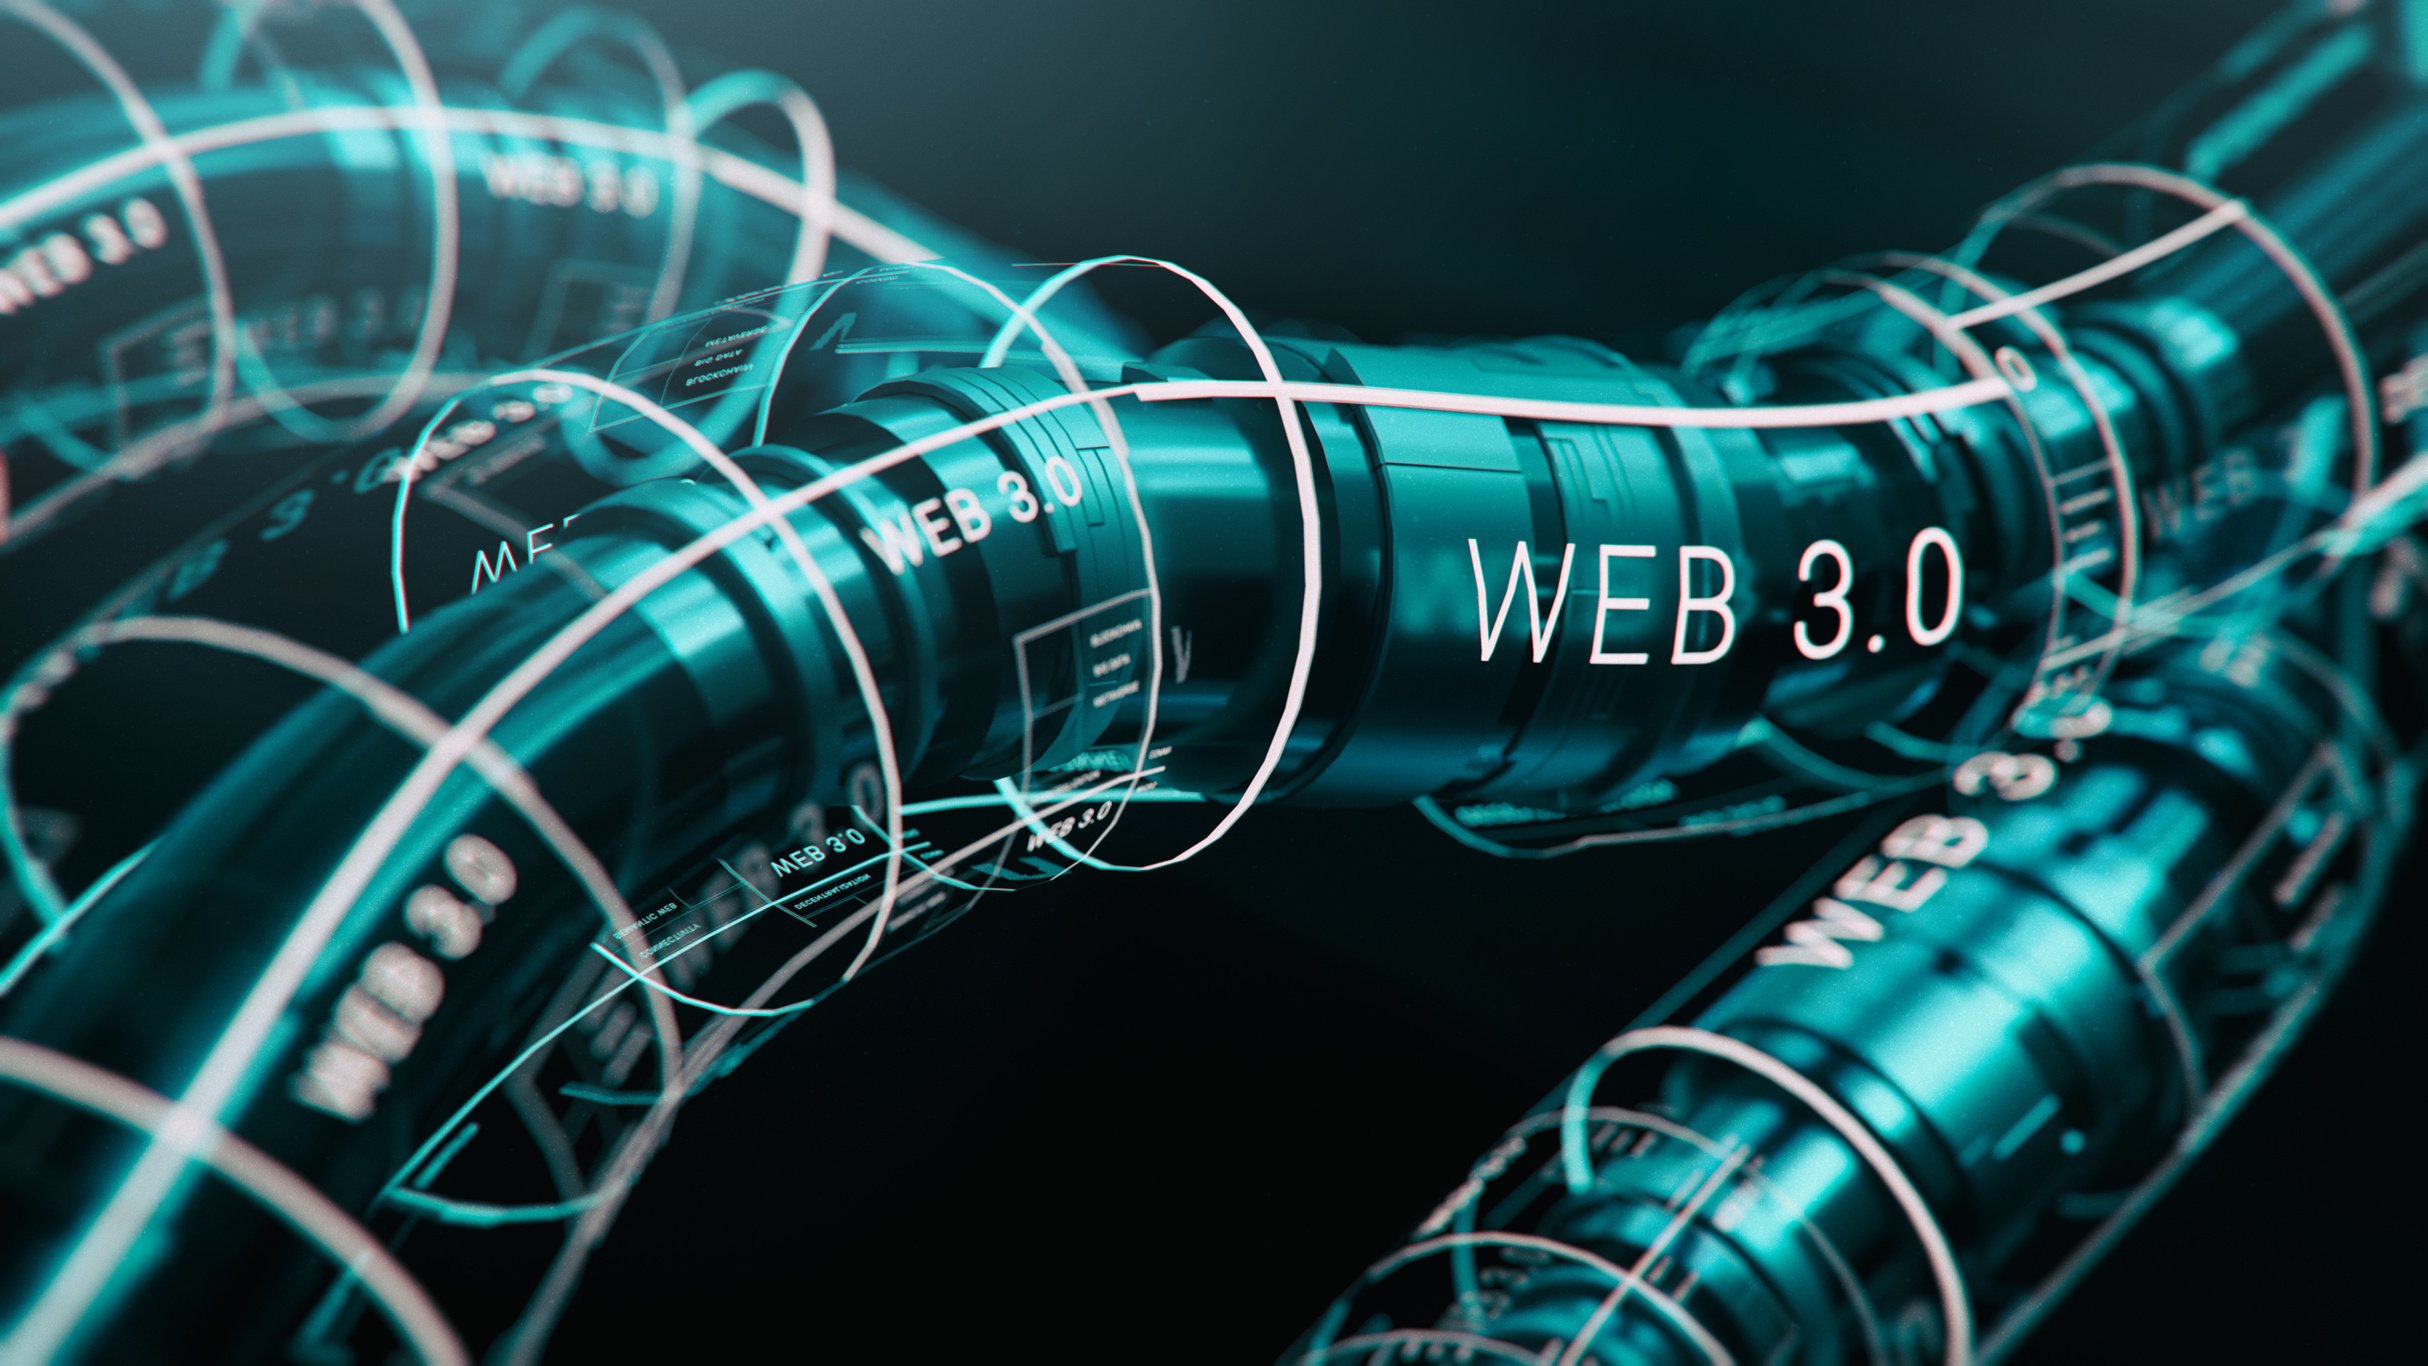 Abstract WEB 3.0 technology